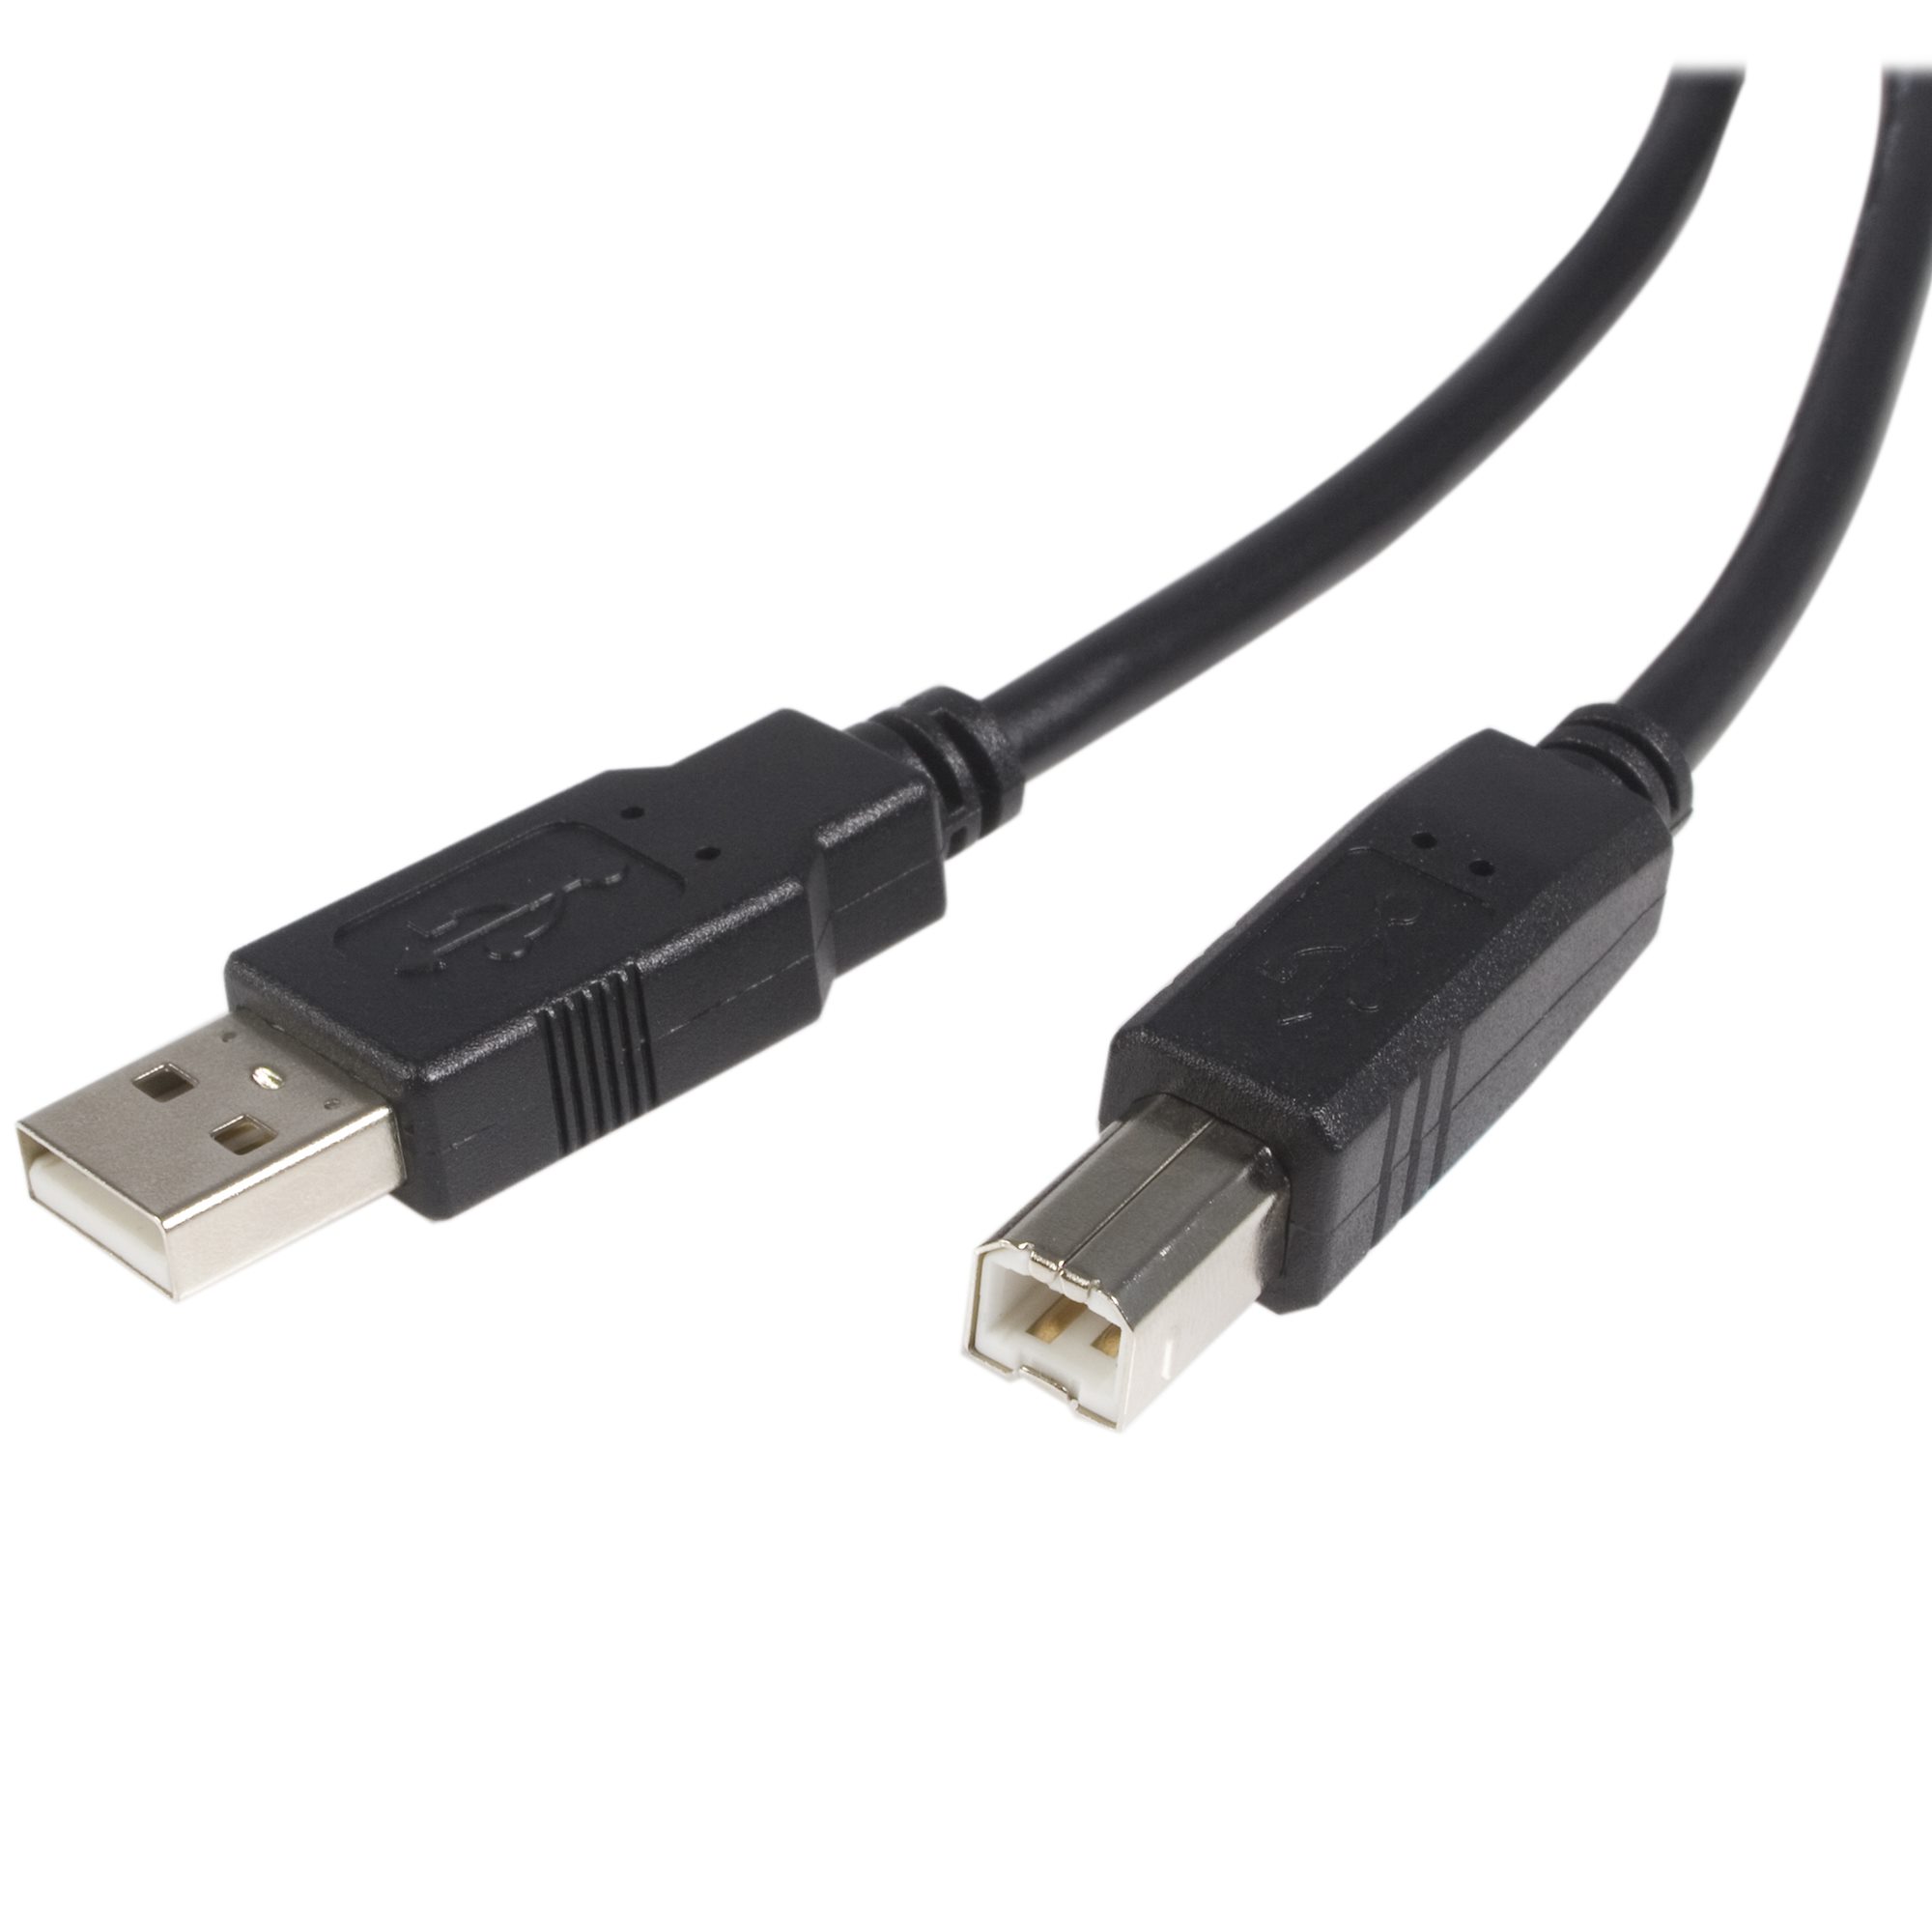 3FT USB 2.0 Printer Cable A Male to B Male Cable 